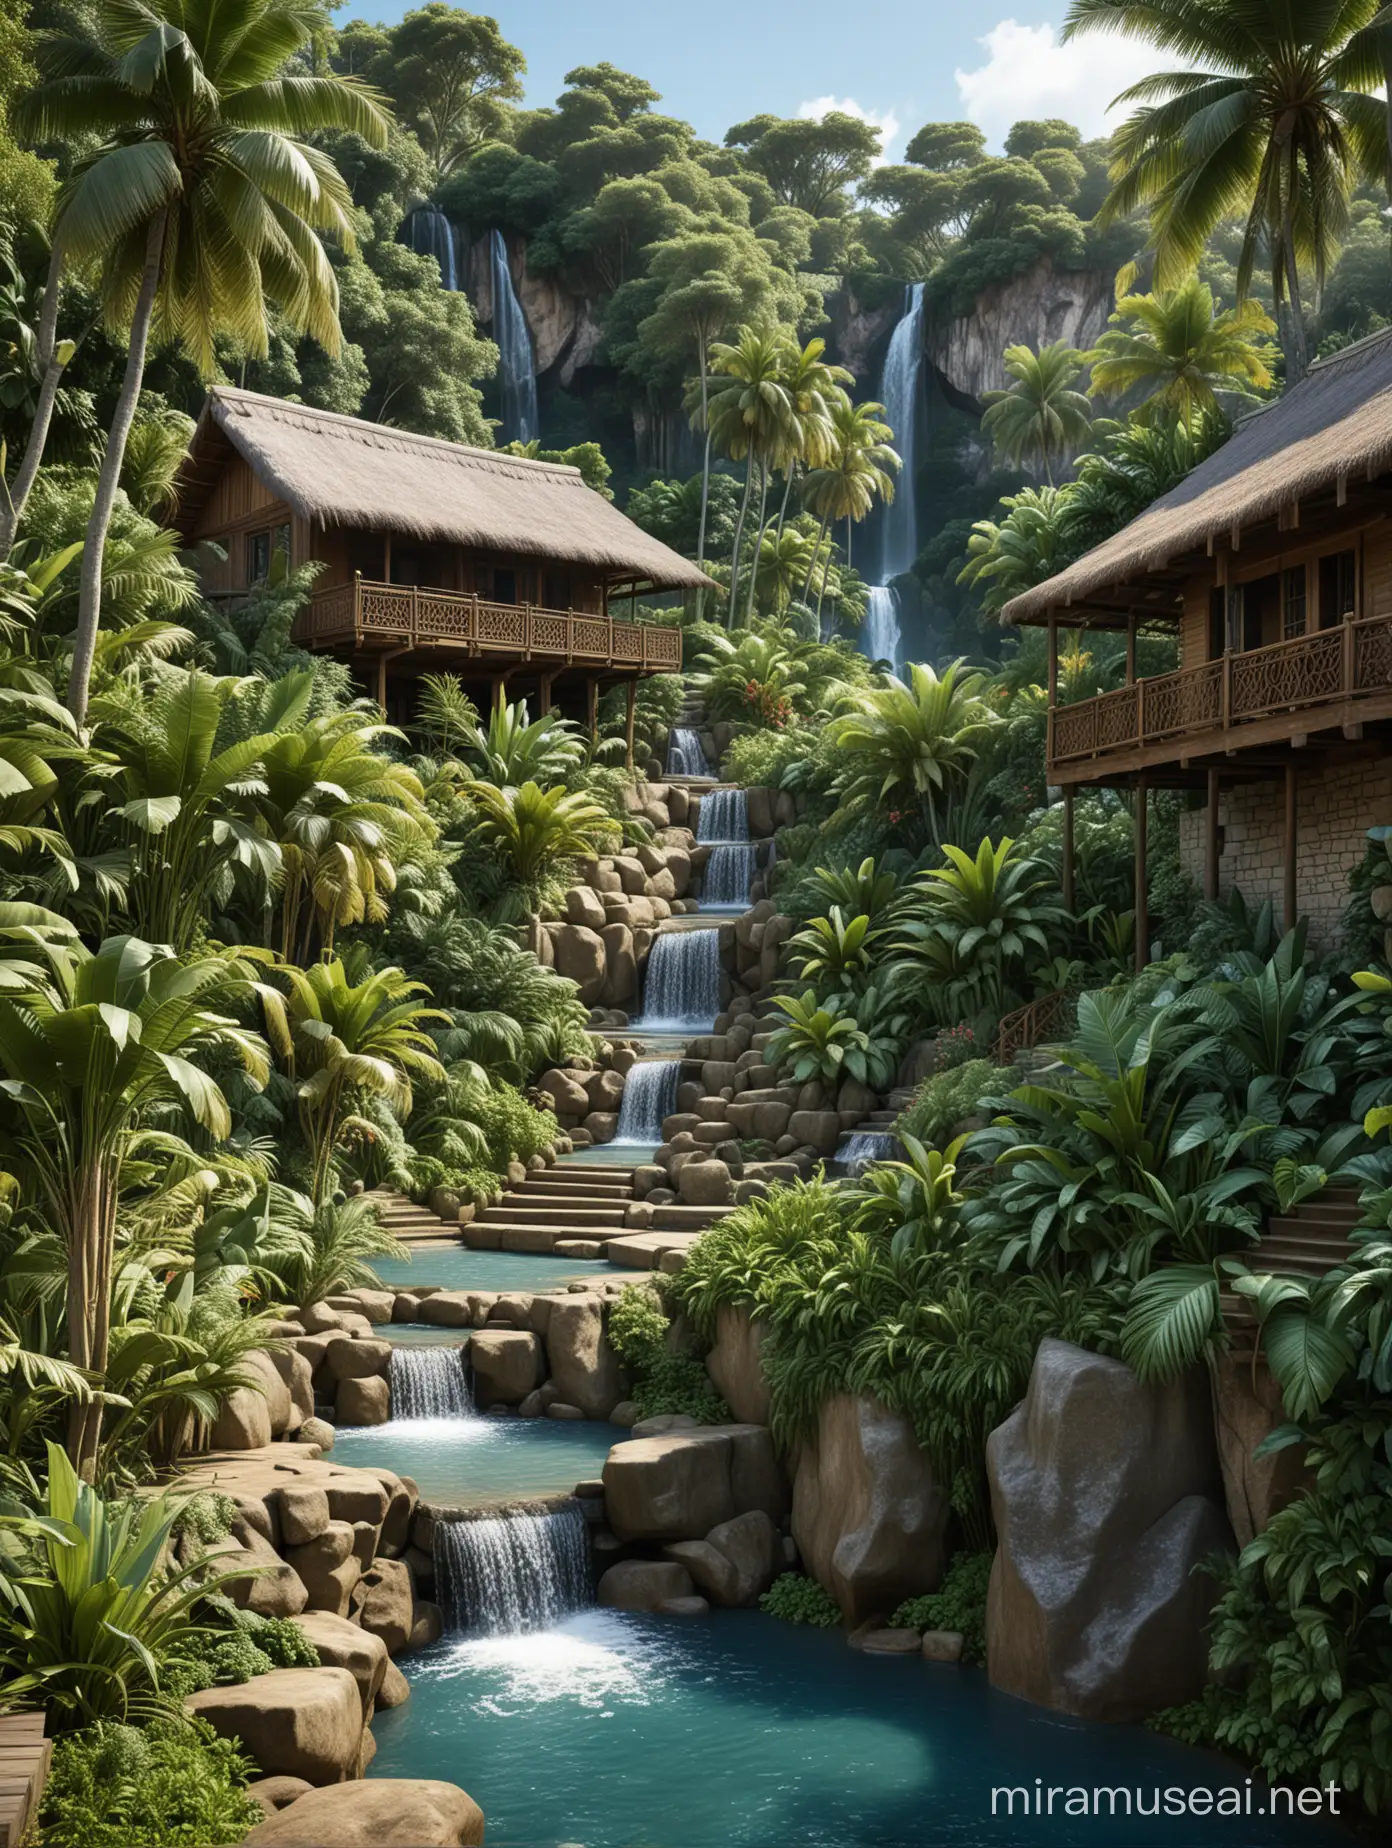 A hyper-realistic image of a traditional wooden house with a blue facade and thatched roof on the edge of a terrace, surrounded by lush greenery with palm trees and tropical plants, a waterfall cascading down amidst a thick tropical forest in the background, and a stone stairway carved into the hillside winding through the terraces.